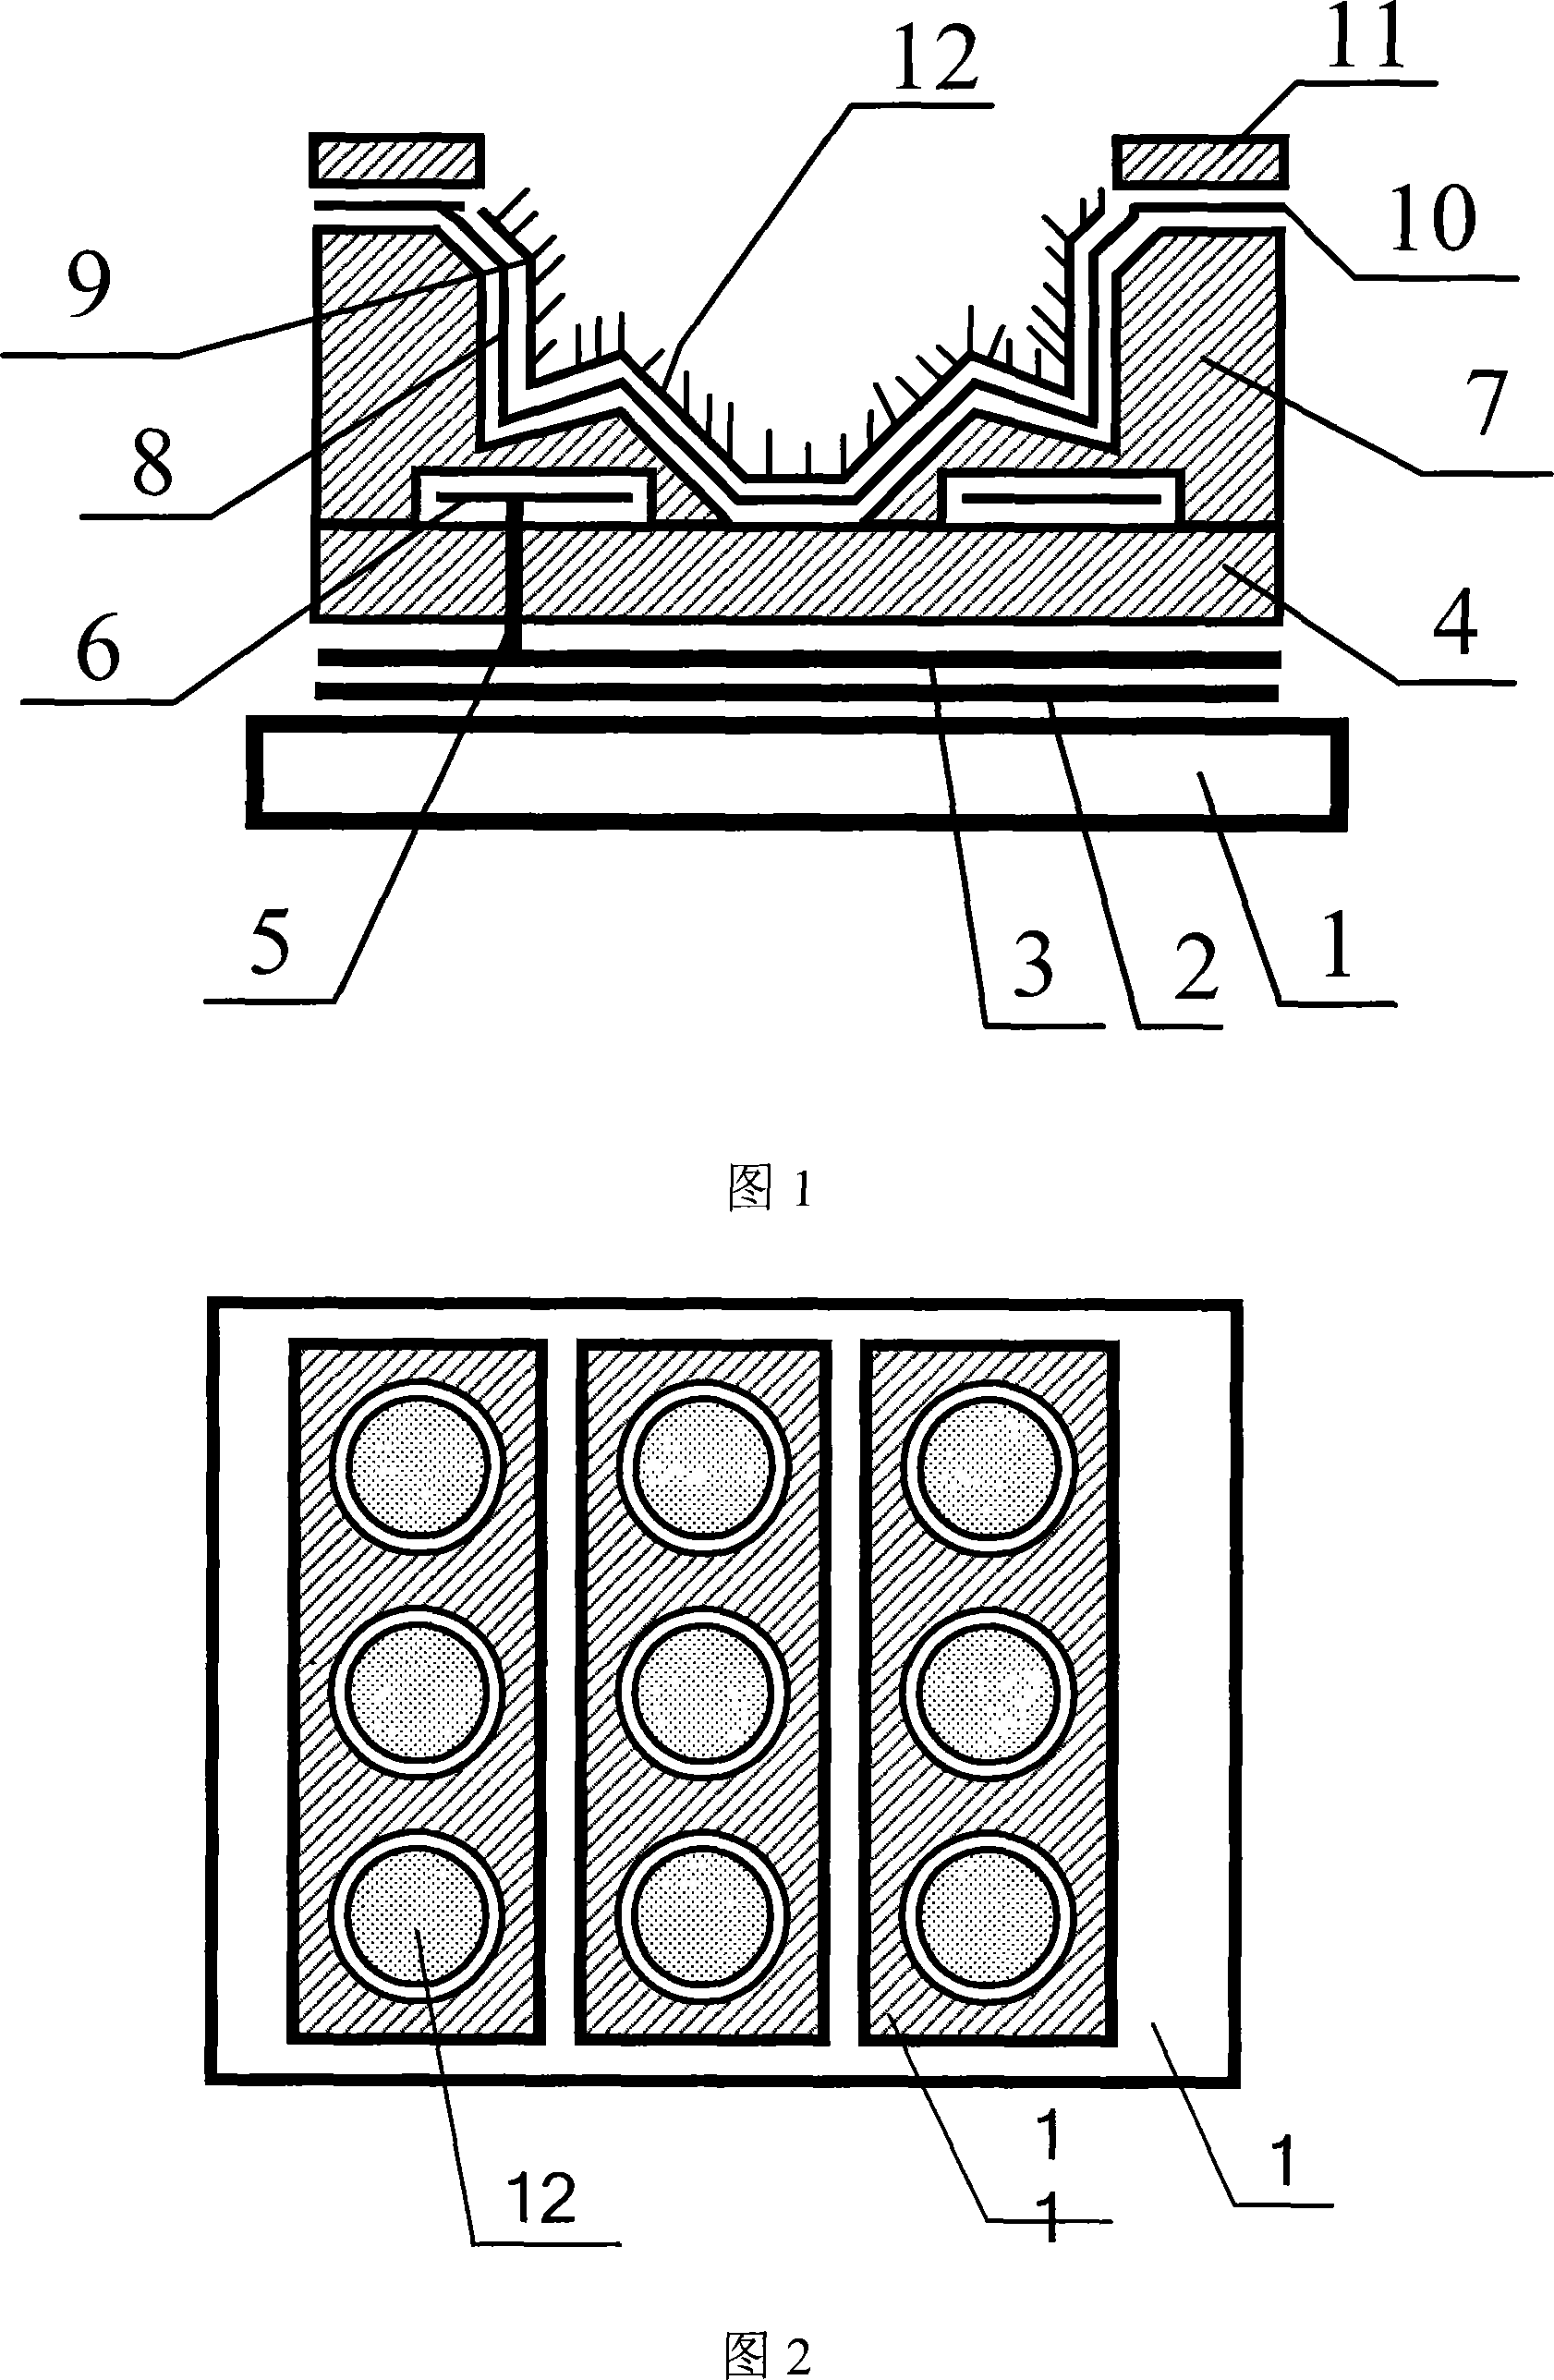 Flat-panel display device with ring-gate modulated valley cathode structure and its preparing process